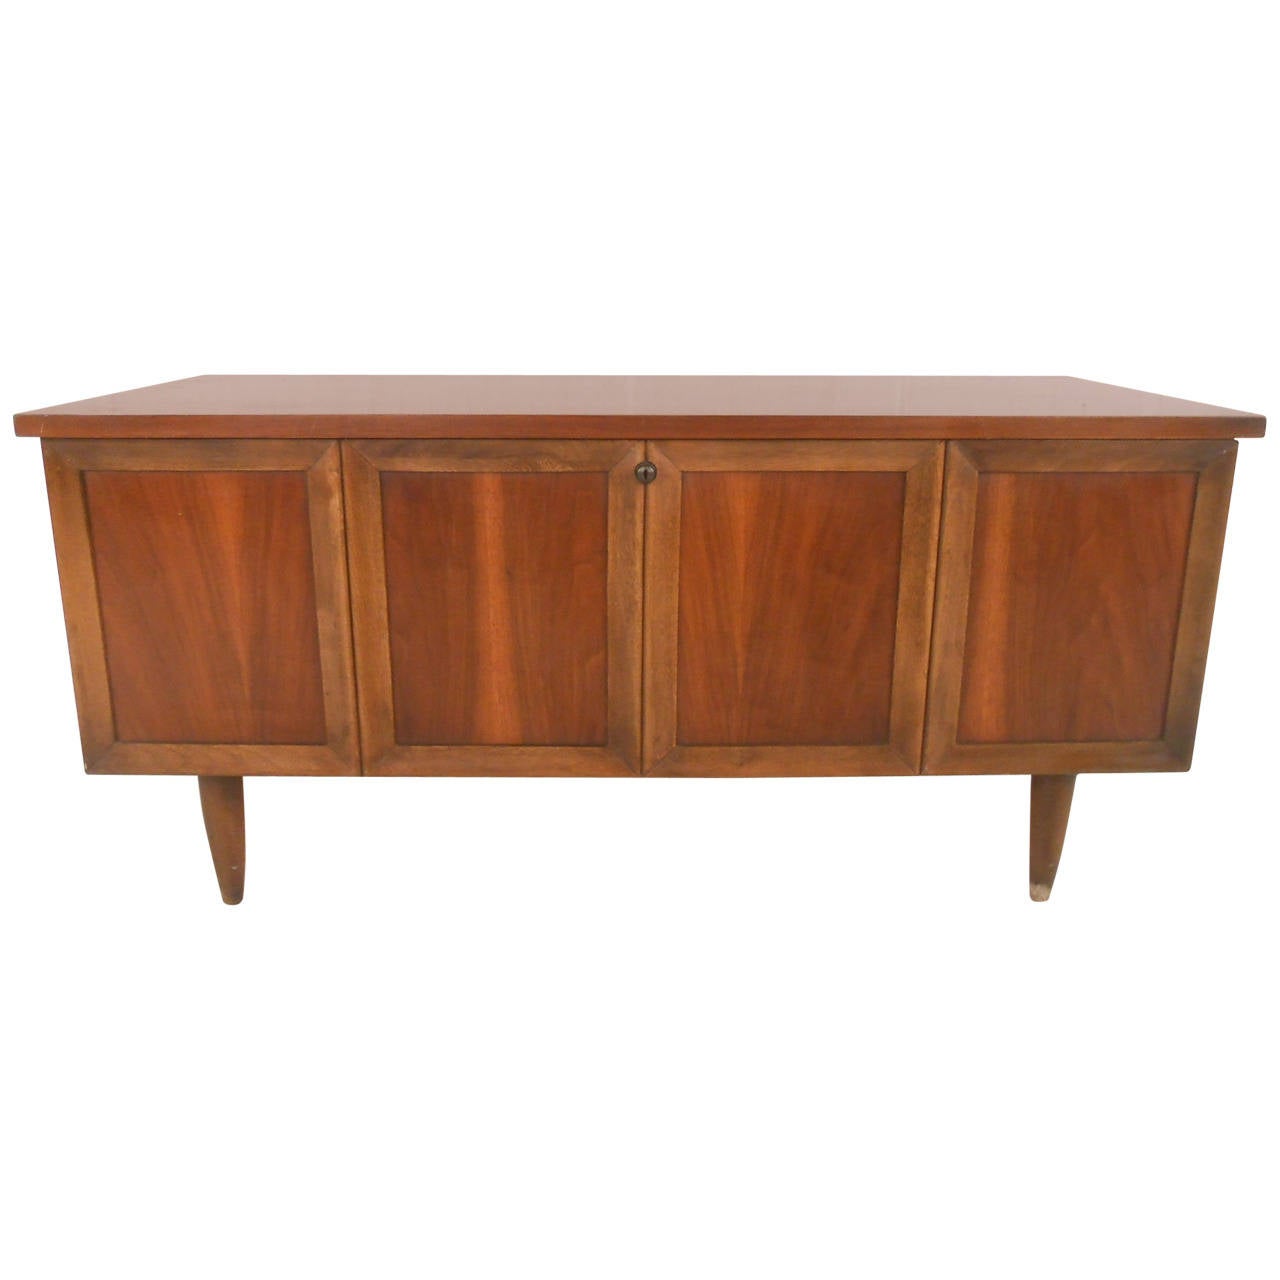 Mid Century Lane Furniture Blanket Chest For Sale At 1stdibs